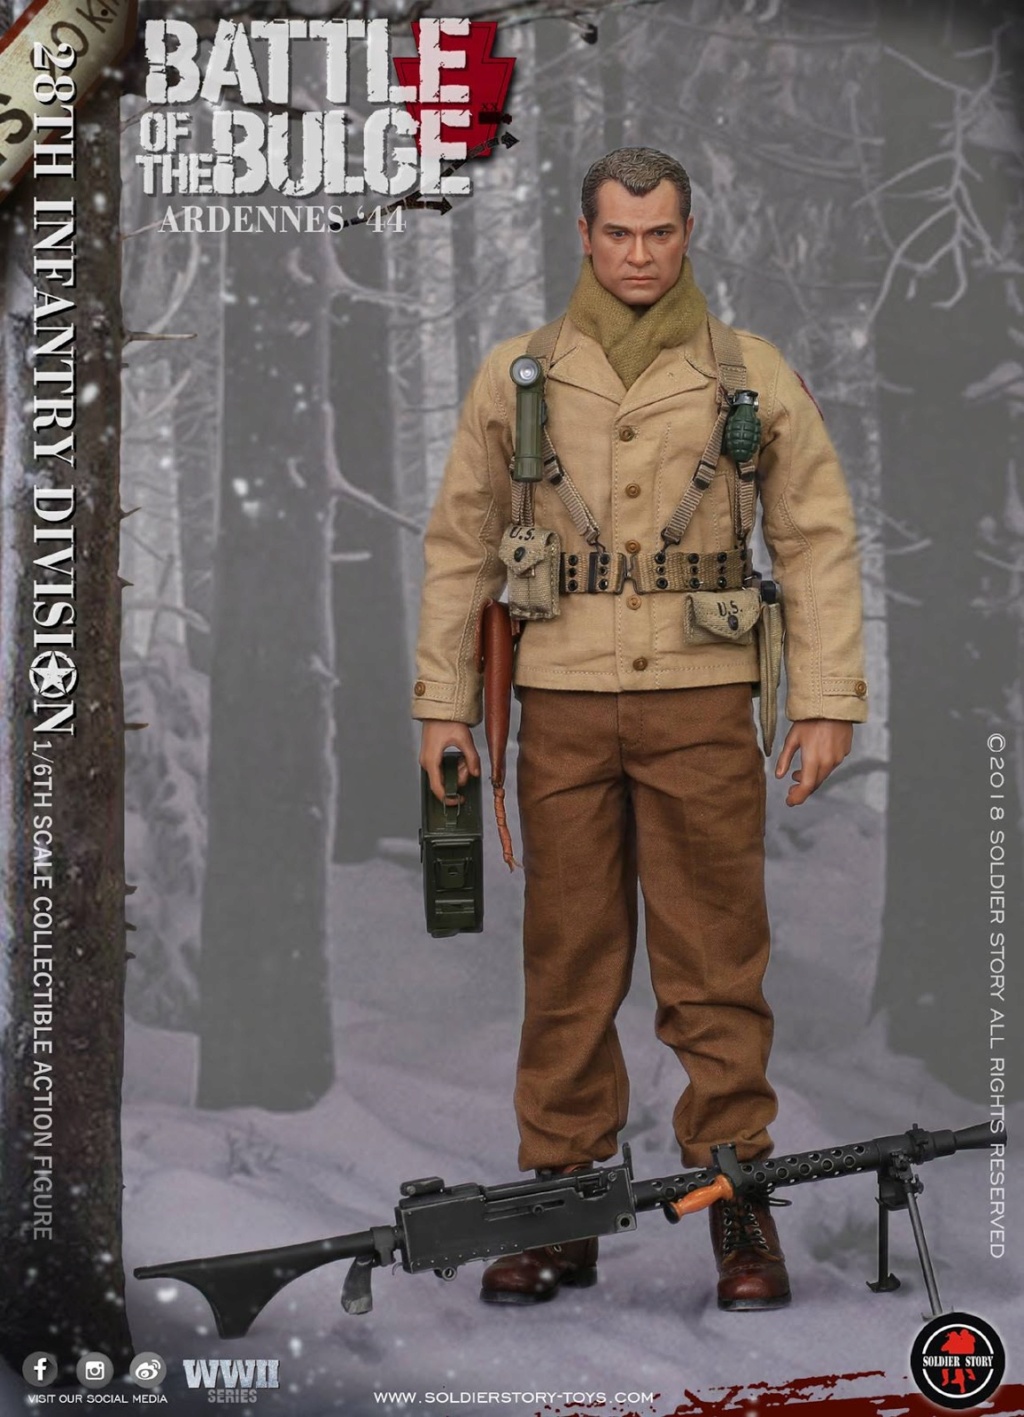 BattleoftheBulge - NEW PRODUCT: Soldier Story: 1/6 scale U.S. Army 28th Infantry Division Ardennes 1944 Bulge112